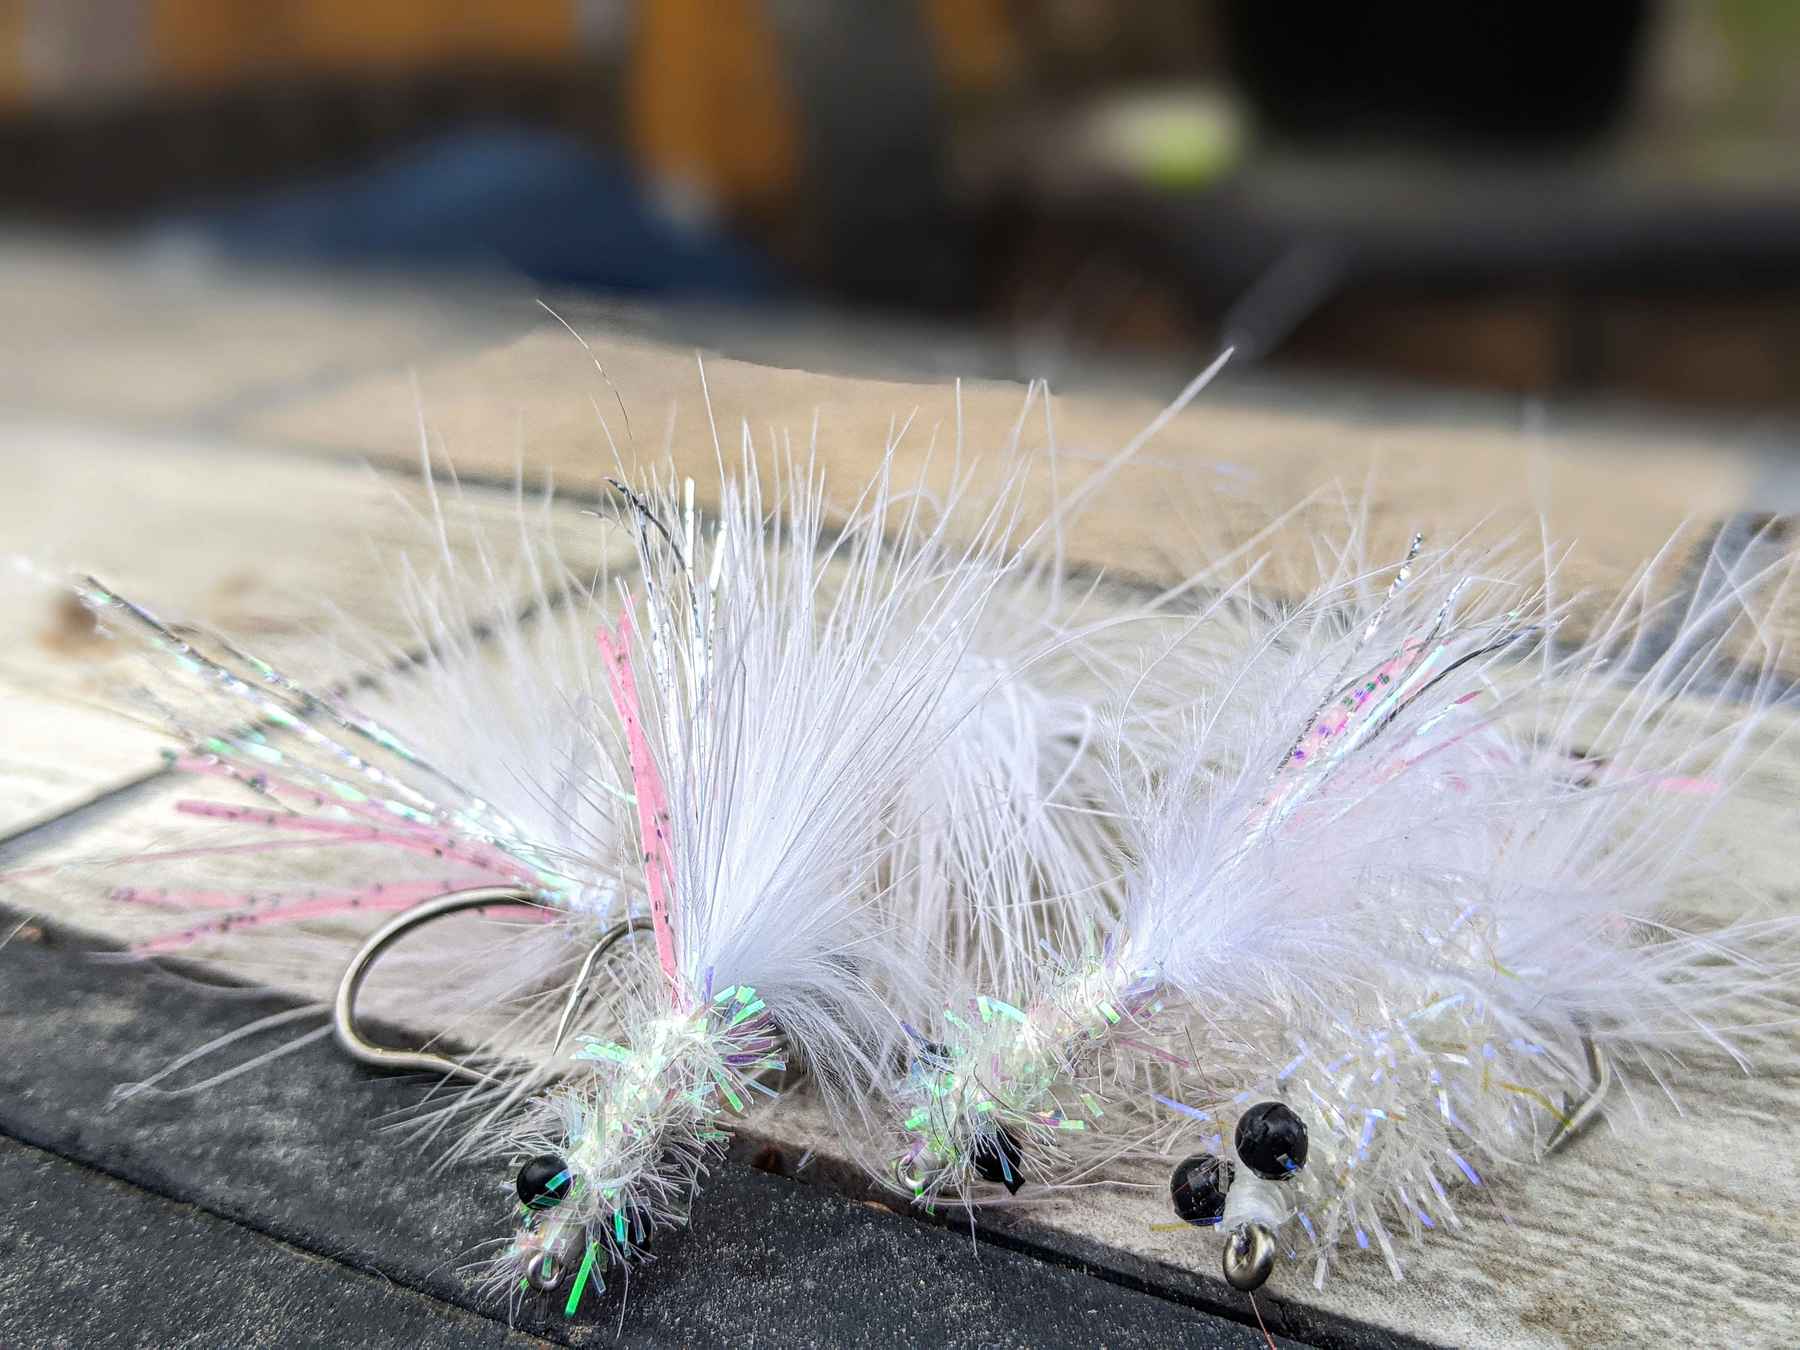 Salty Minnow Gray & White S2 Fishing Fly, Saltwater Flies